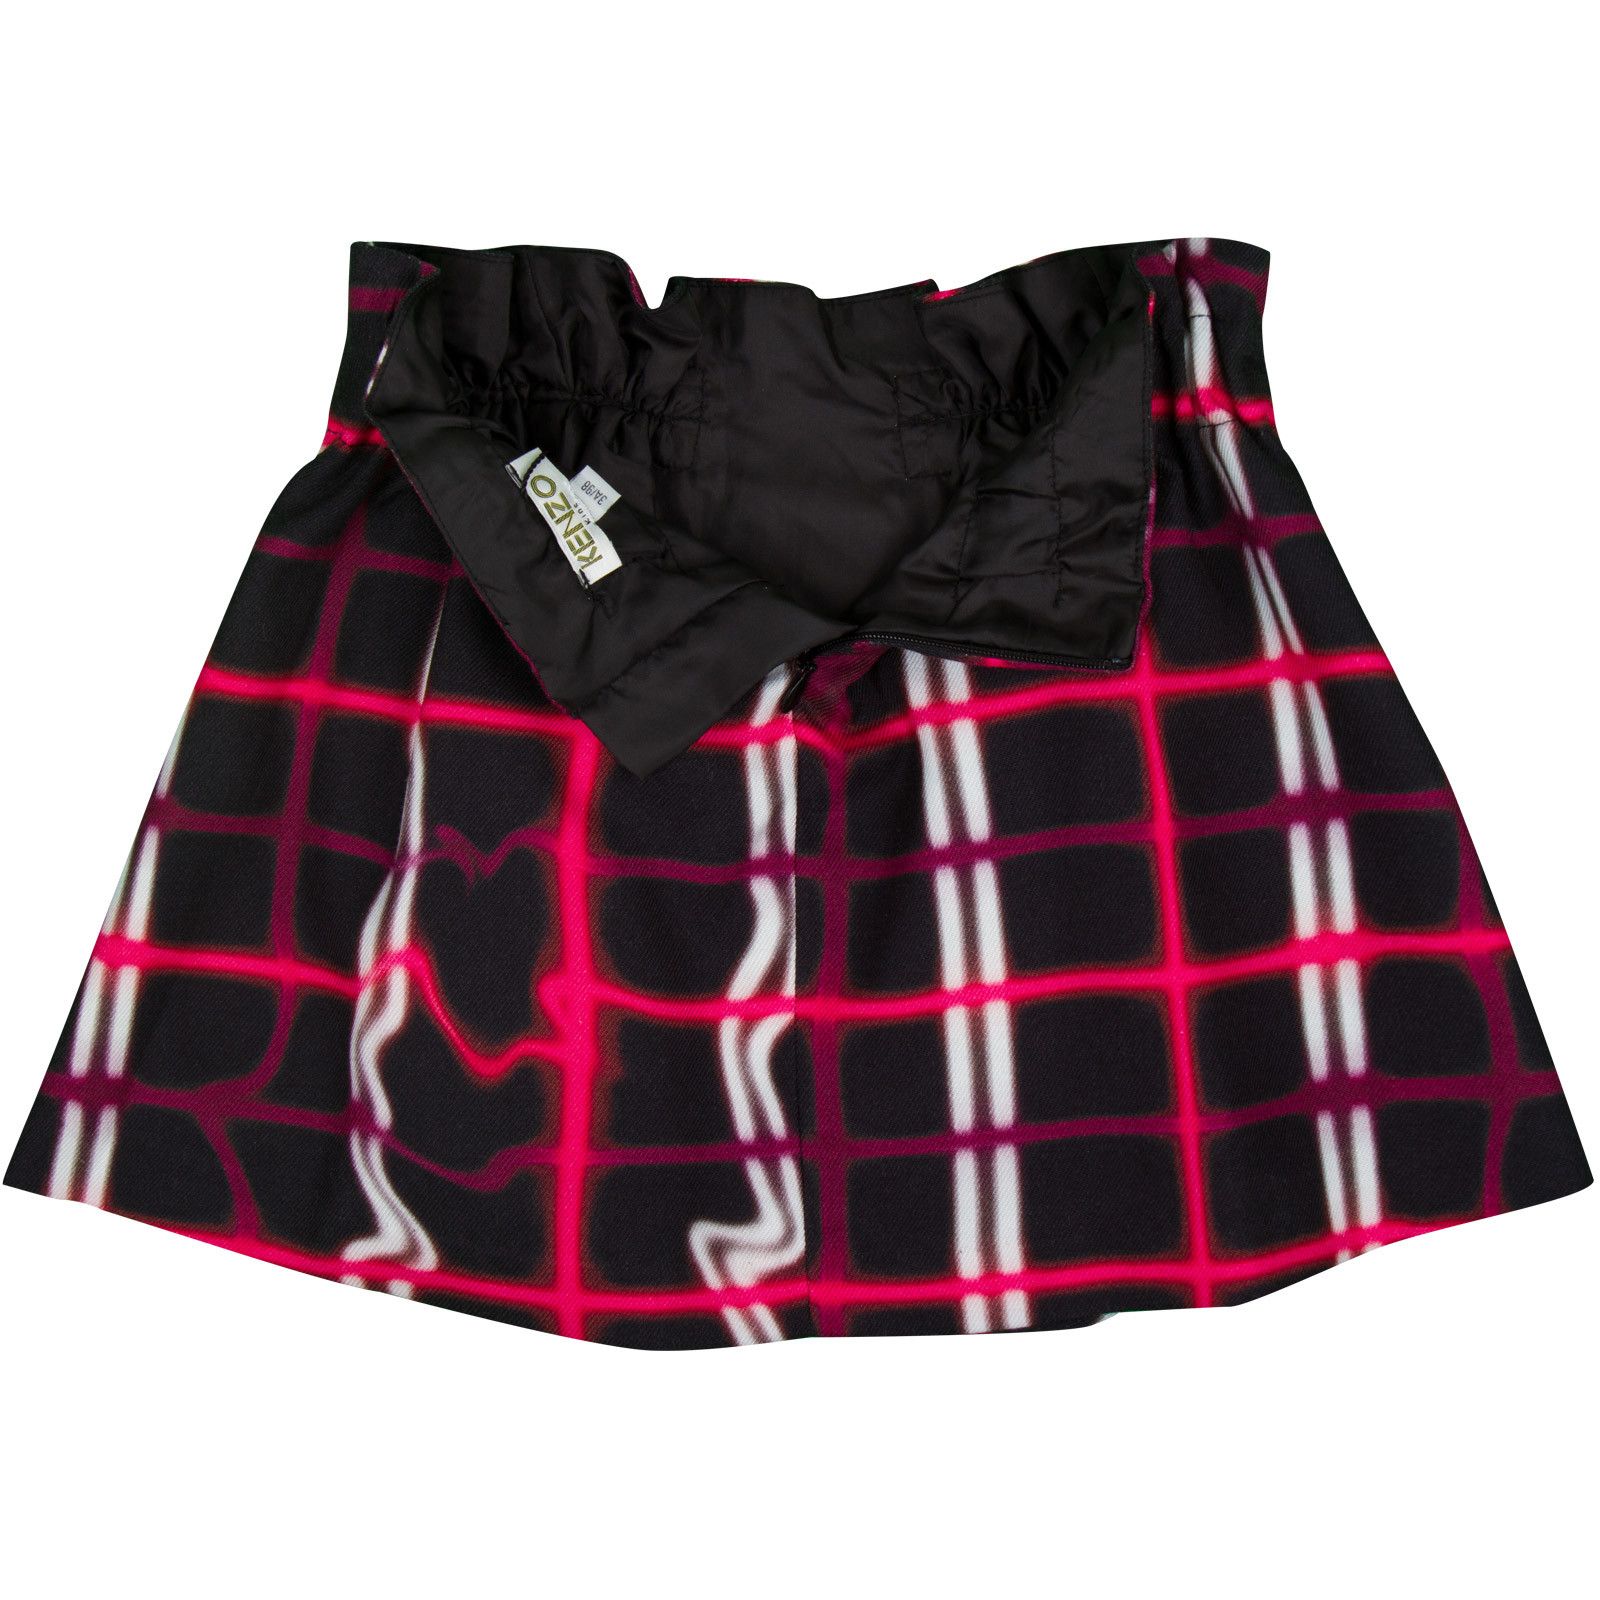 Girls Black Skirt With Red&White Check Printed - CÉMAROSE | Children's Fashion Store - 4